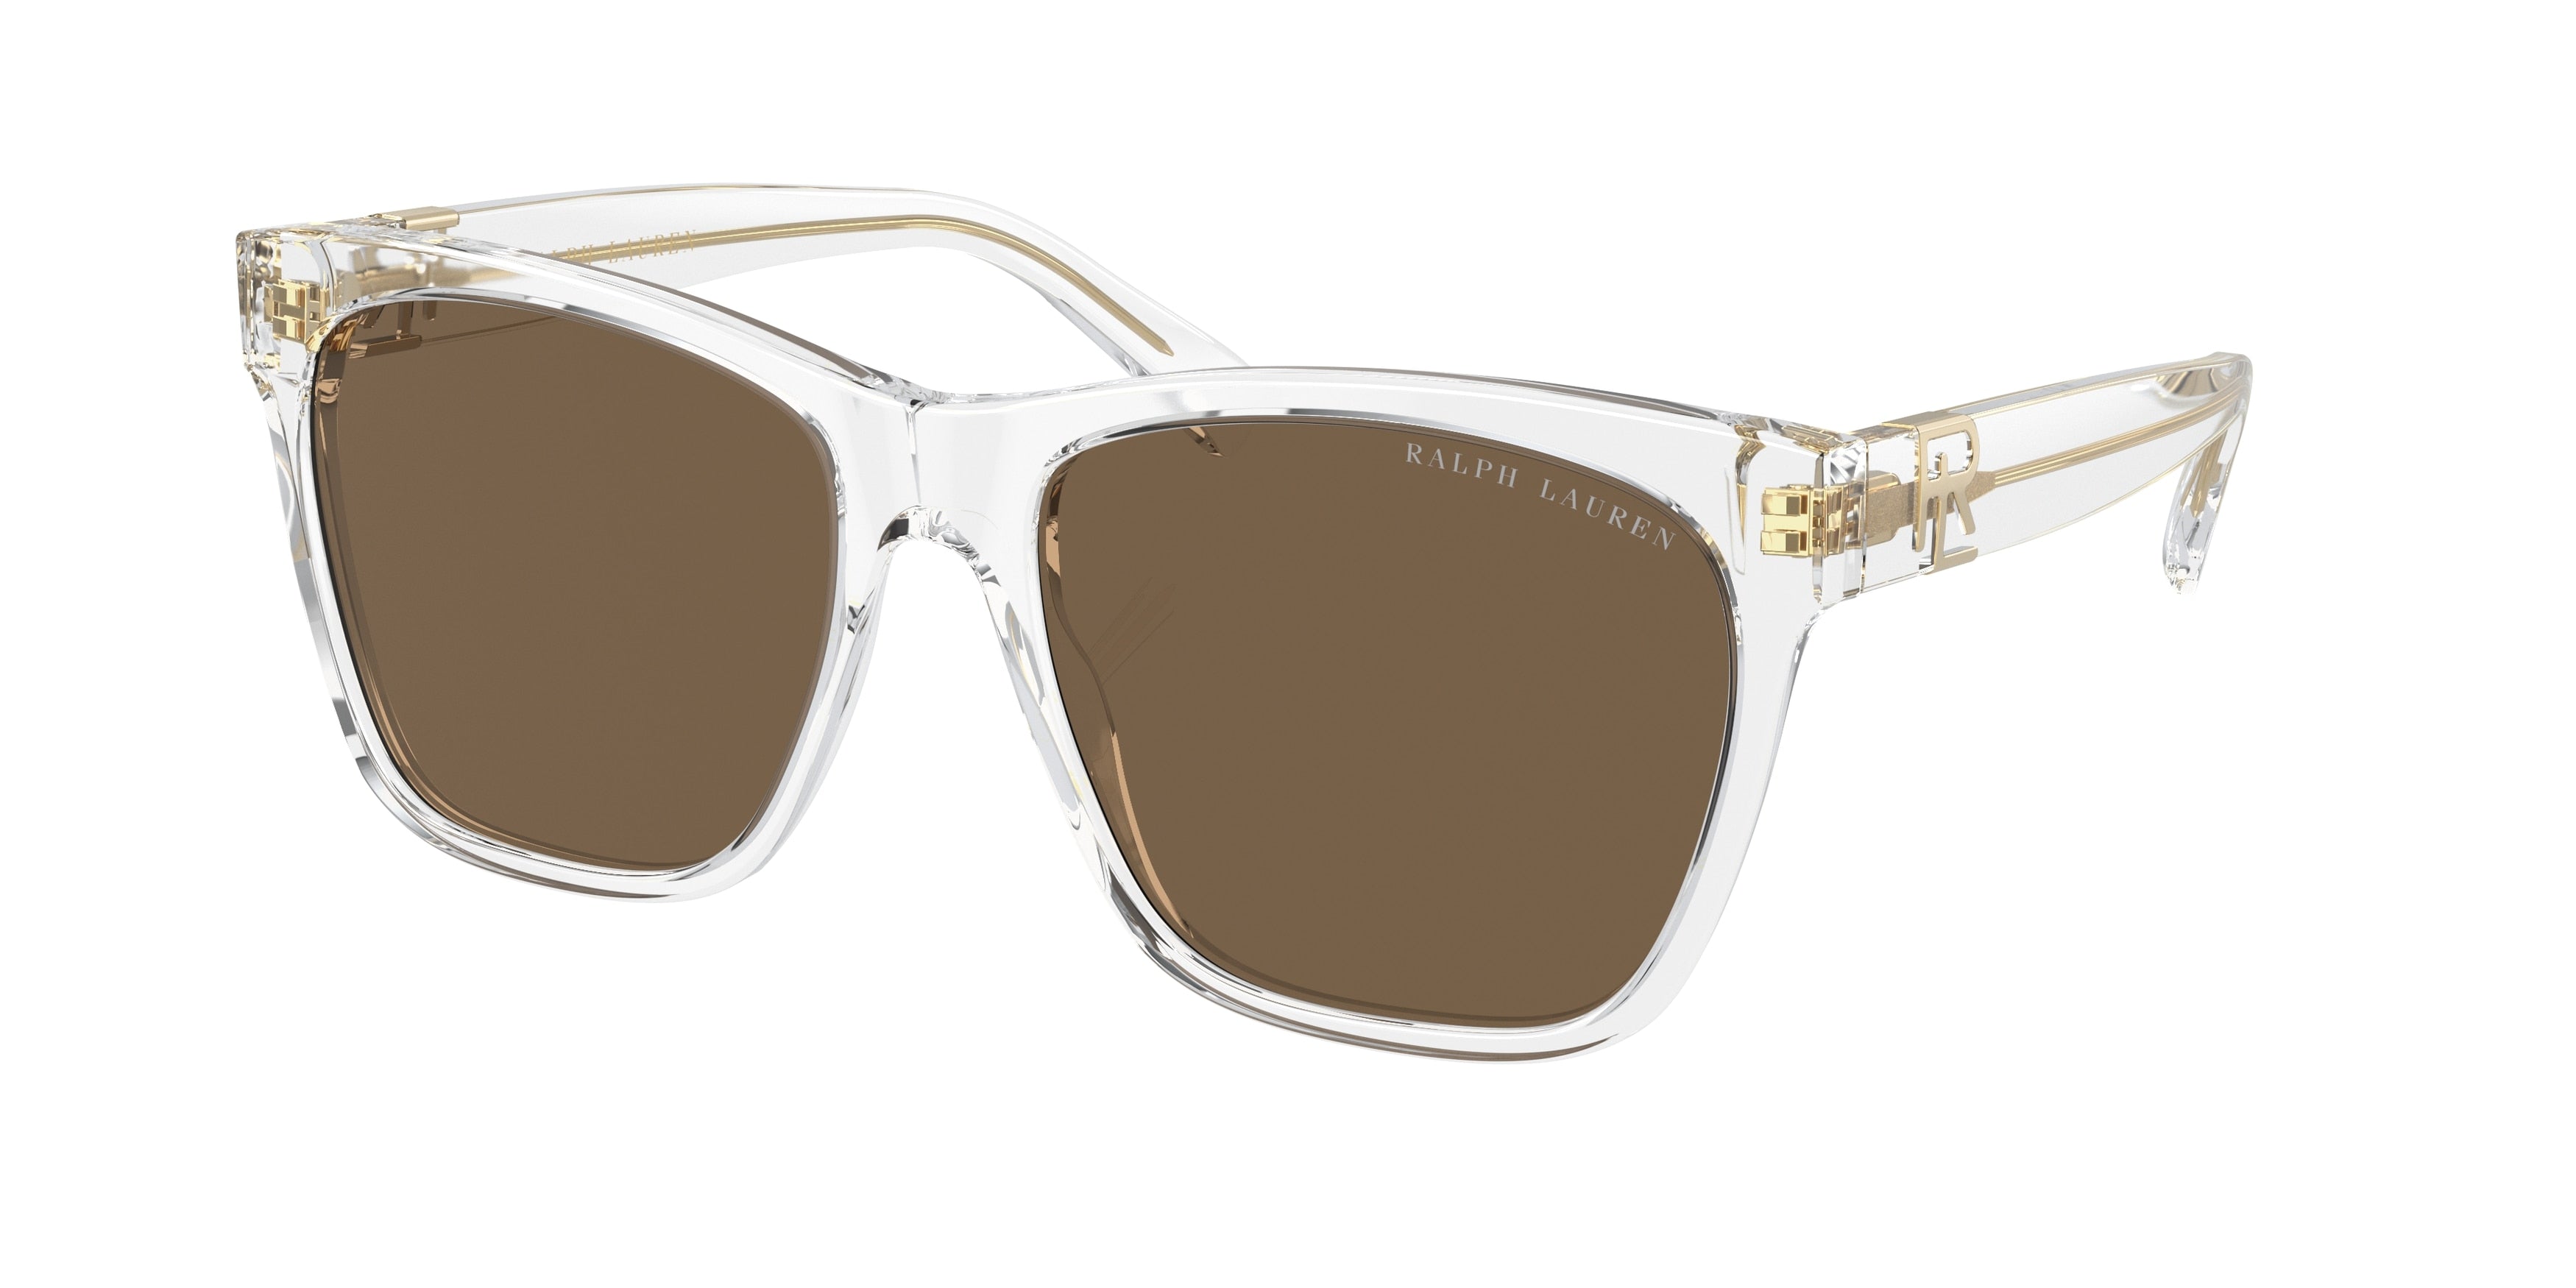 Ralph Lauren THE RICKY II RL8212 Square Sunglasses  500273-Crystal 57-145-17 - Color Map White